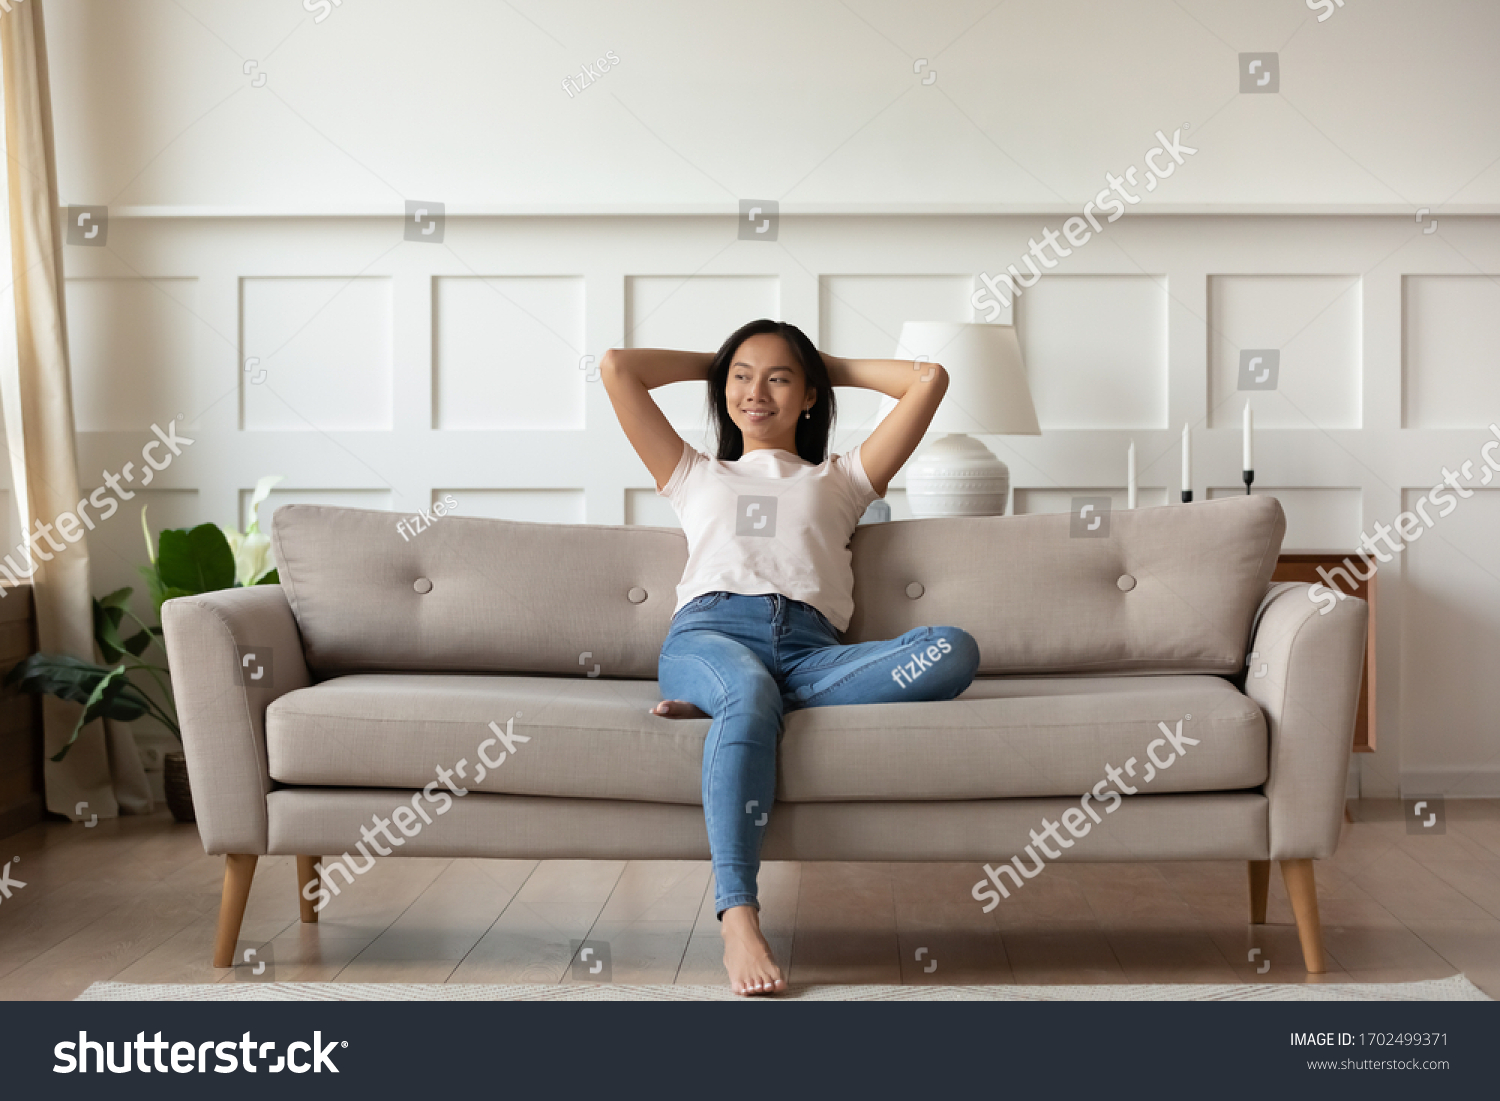 Asian woman looks at distance resting leaned on couch enjoy fresh air in summer day in modern fashionable living room interior, full length image. Contemporary apartments owner or carefree day concept #1702499371